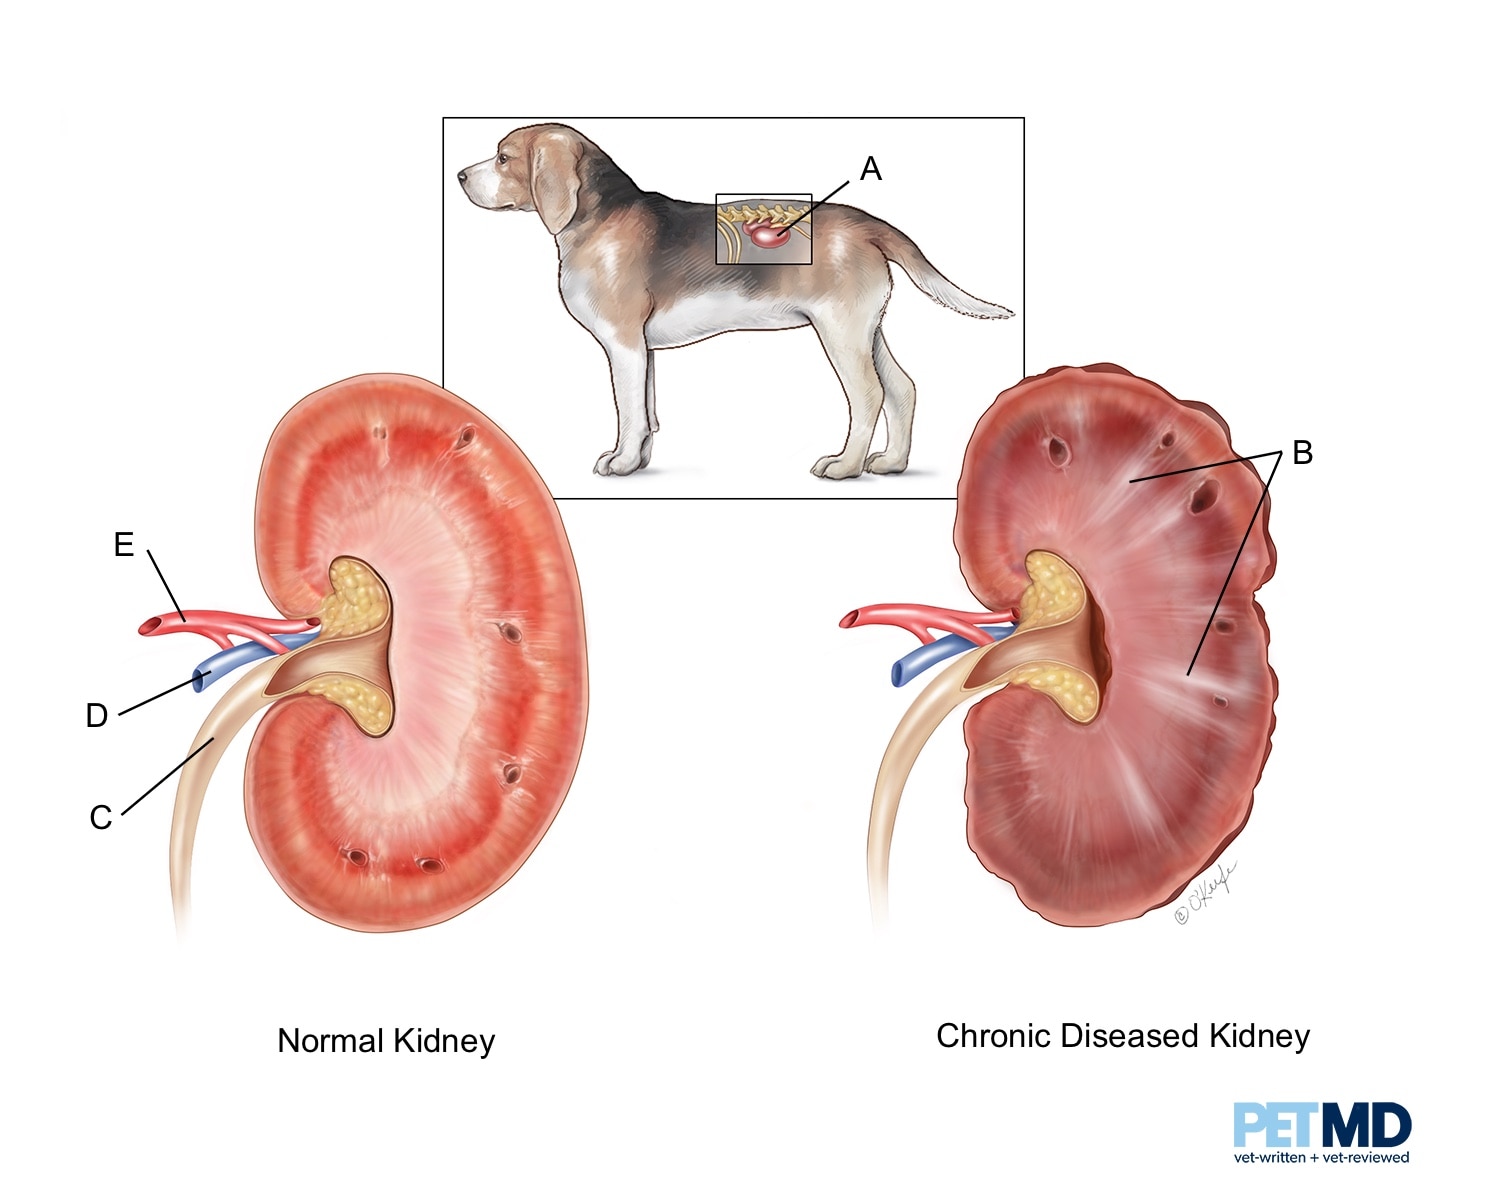 does my dog have kidney disease